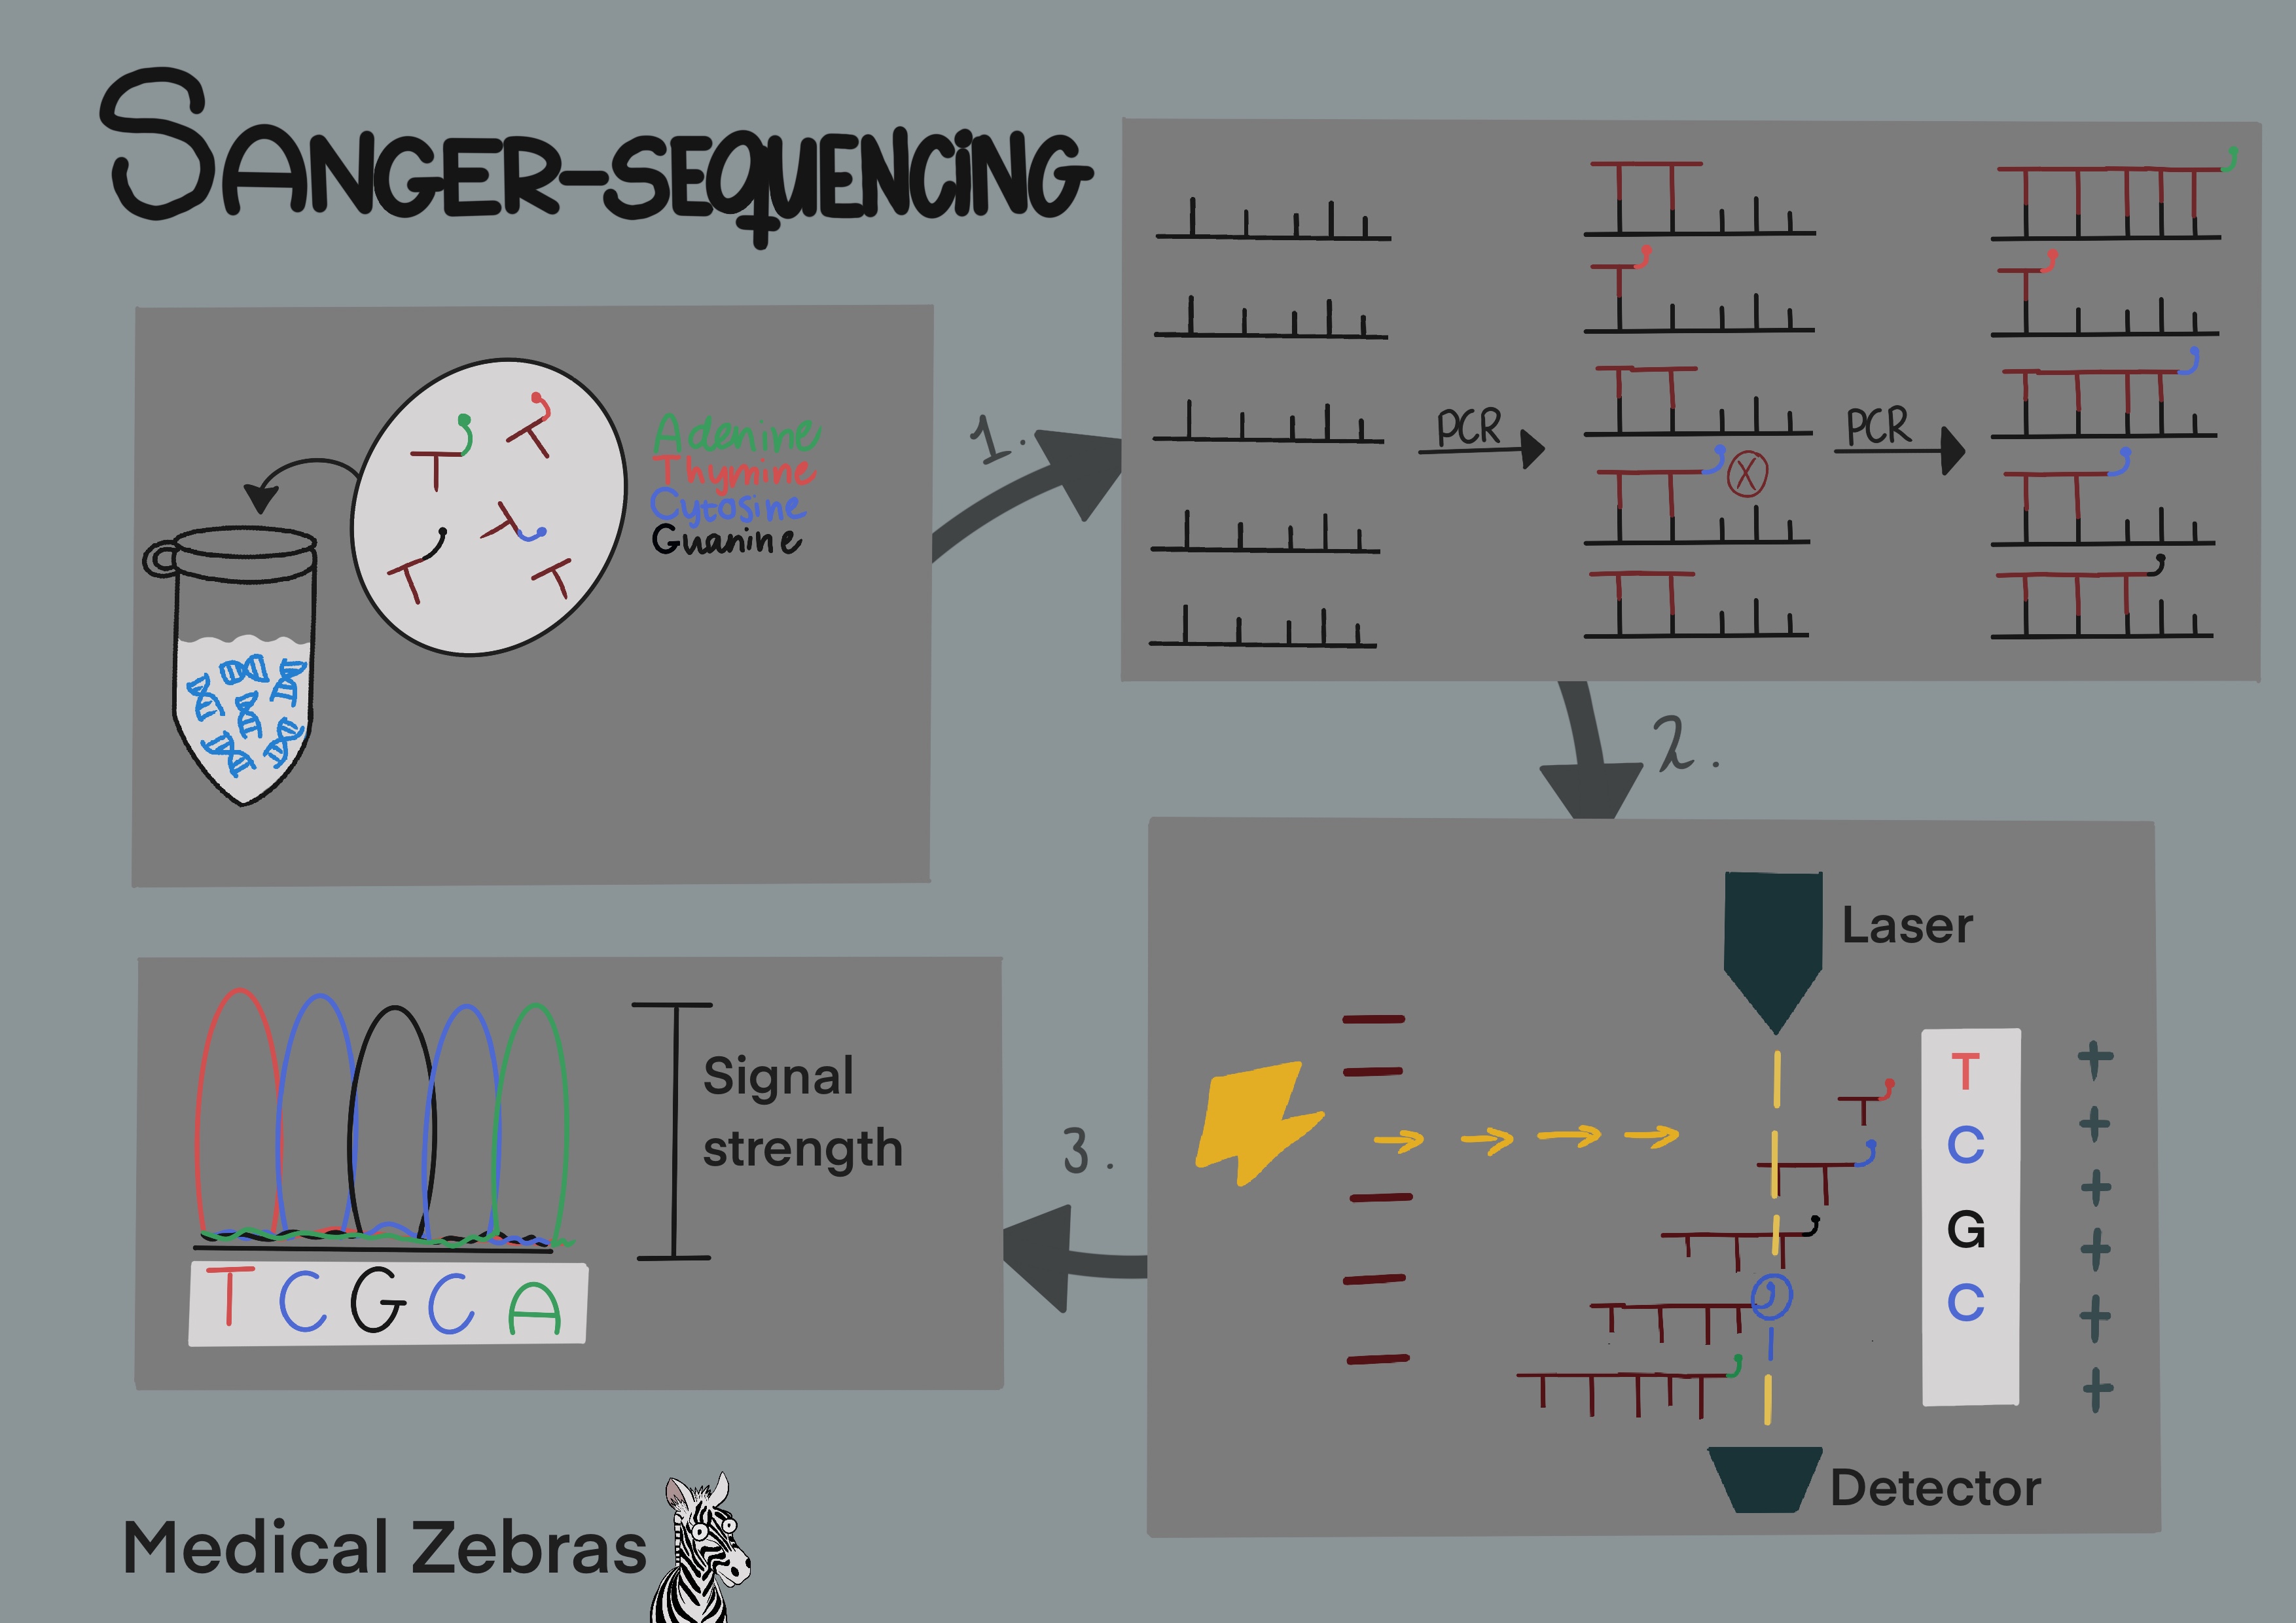 Sanger sequencing explained